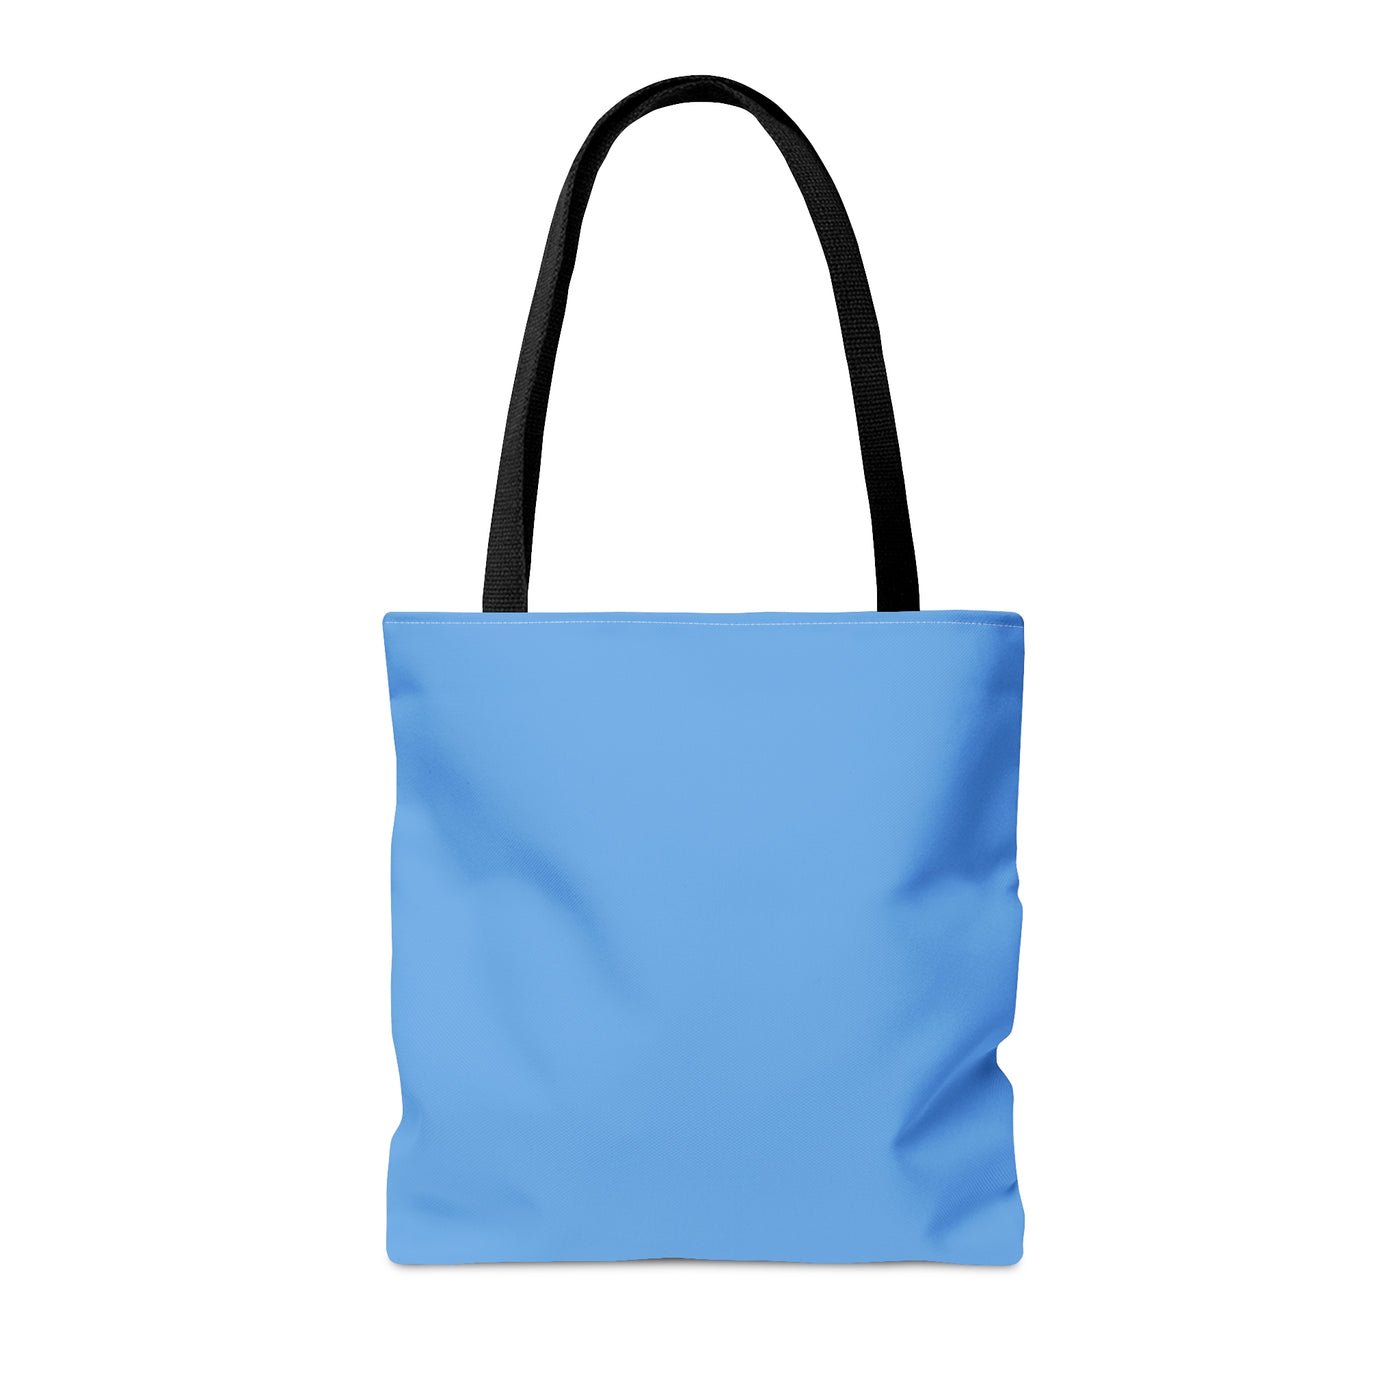 Polyester Tote Bags | Printed Tote Bags | Let's Travel